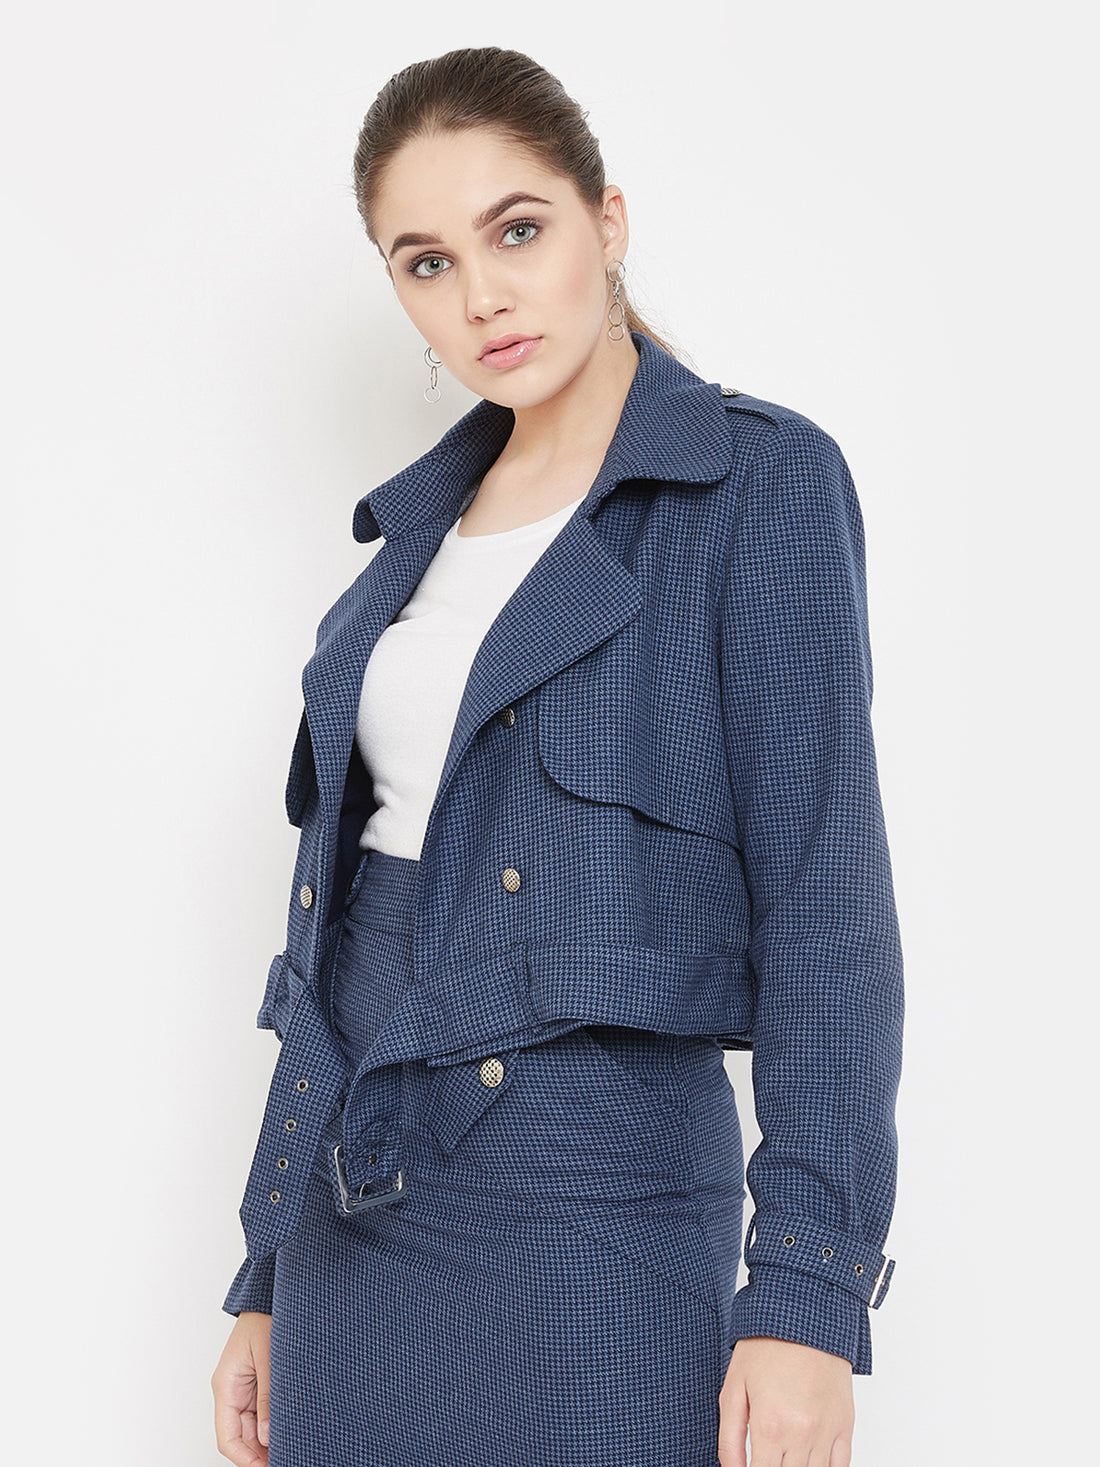 Blue Trench Coat